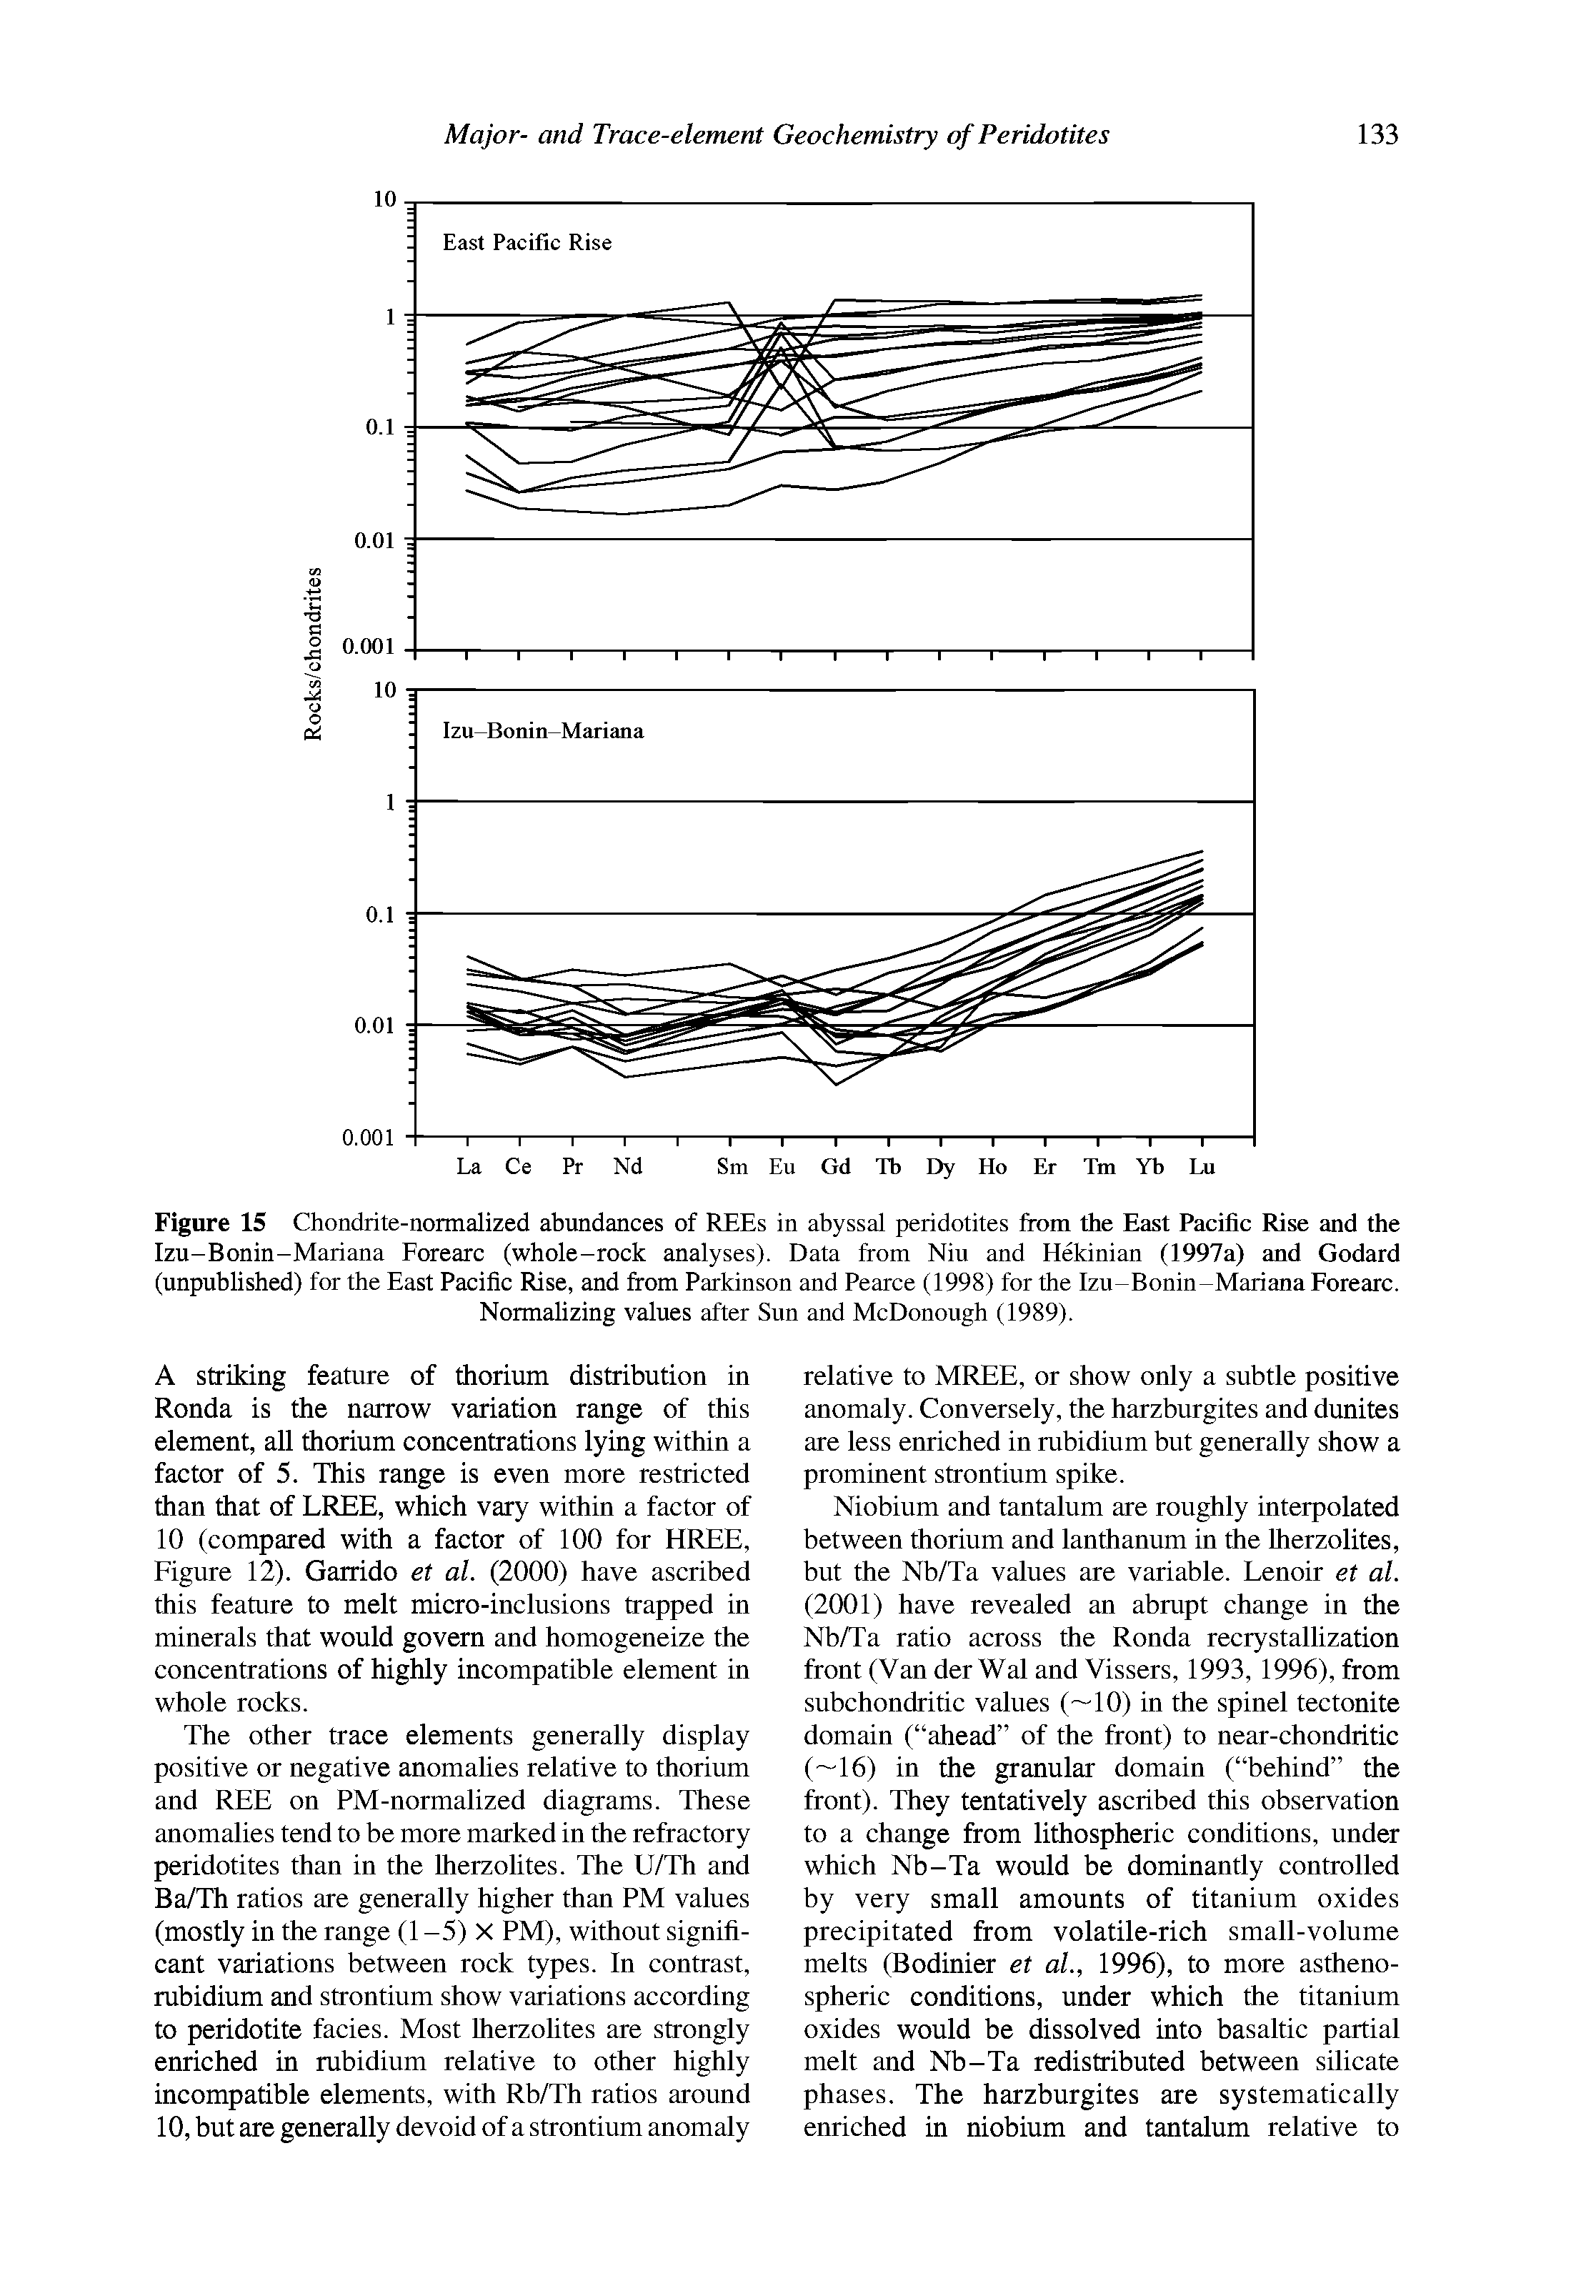 Figure 15 Chondrite-normalized abundances of REEs in abyssal peridotites from the East Pacific Rise and the Izu-Bonin-Mariana Forearc (whole-rock analyses). Data from Niu and Hekinian (1997a) and Godard (unpublished) for the East Pacific Rise, and from Parkinson and Pearce (1998) for the Izu-Bonin-Mariana Forearc.